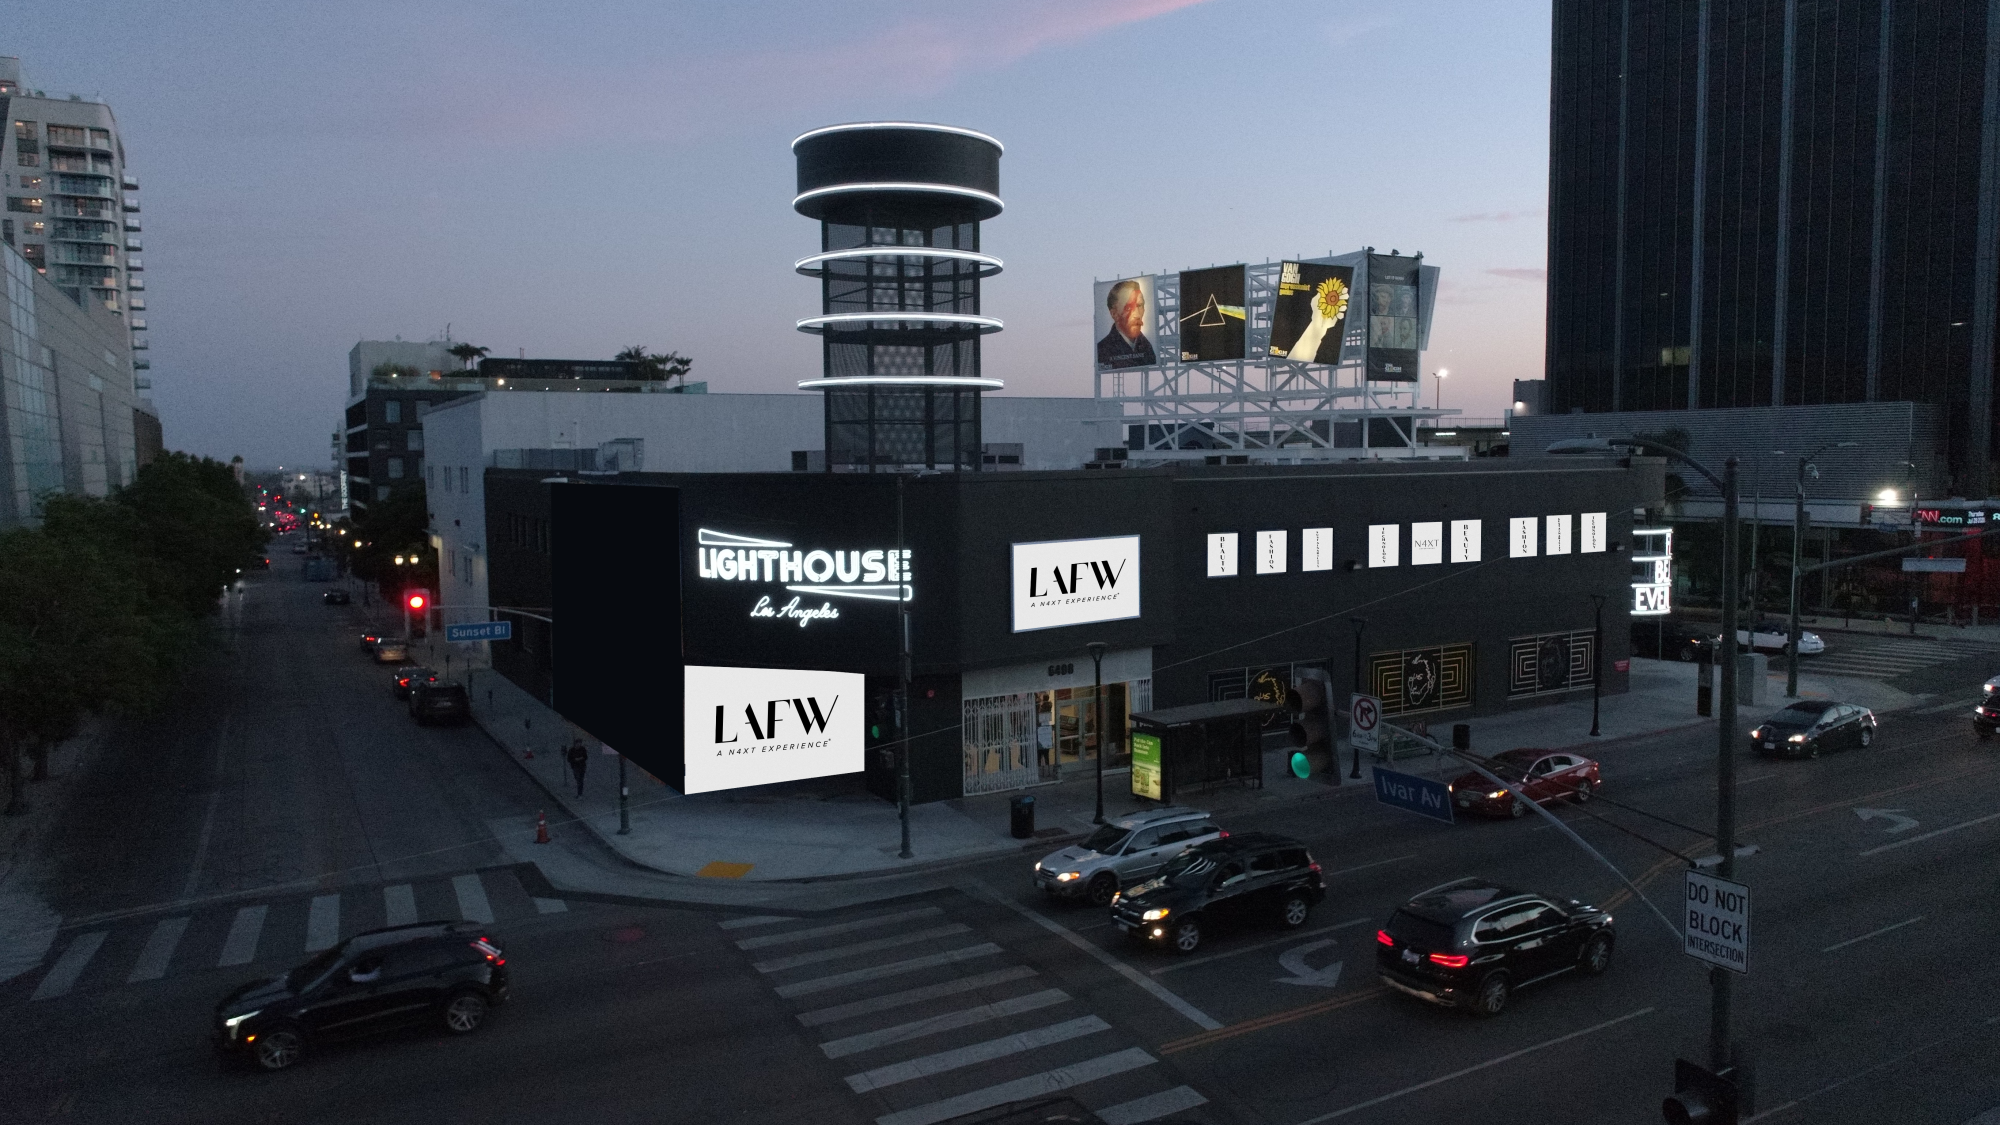 Exterior view of a black corner building branded with LAFW imagery